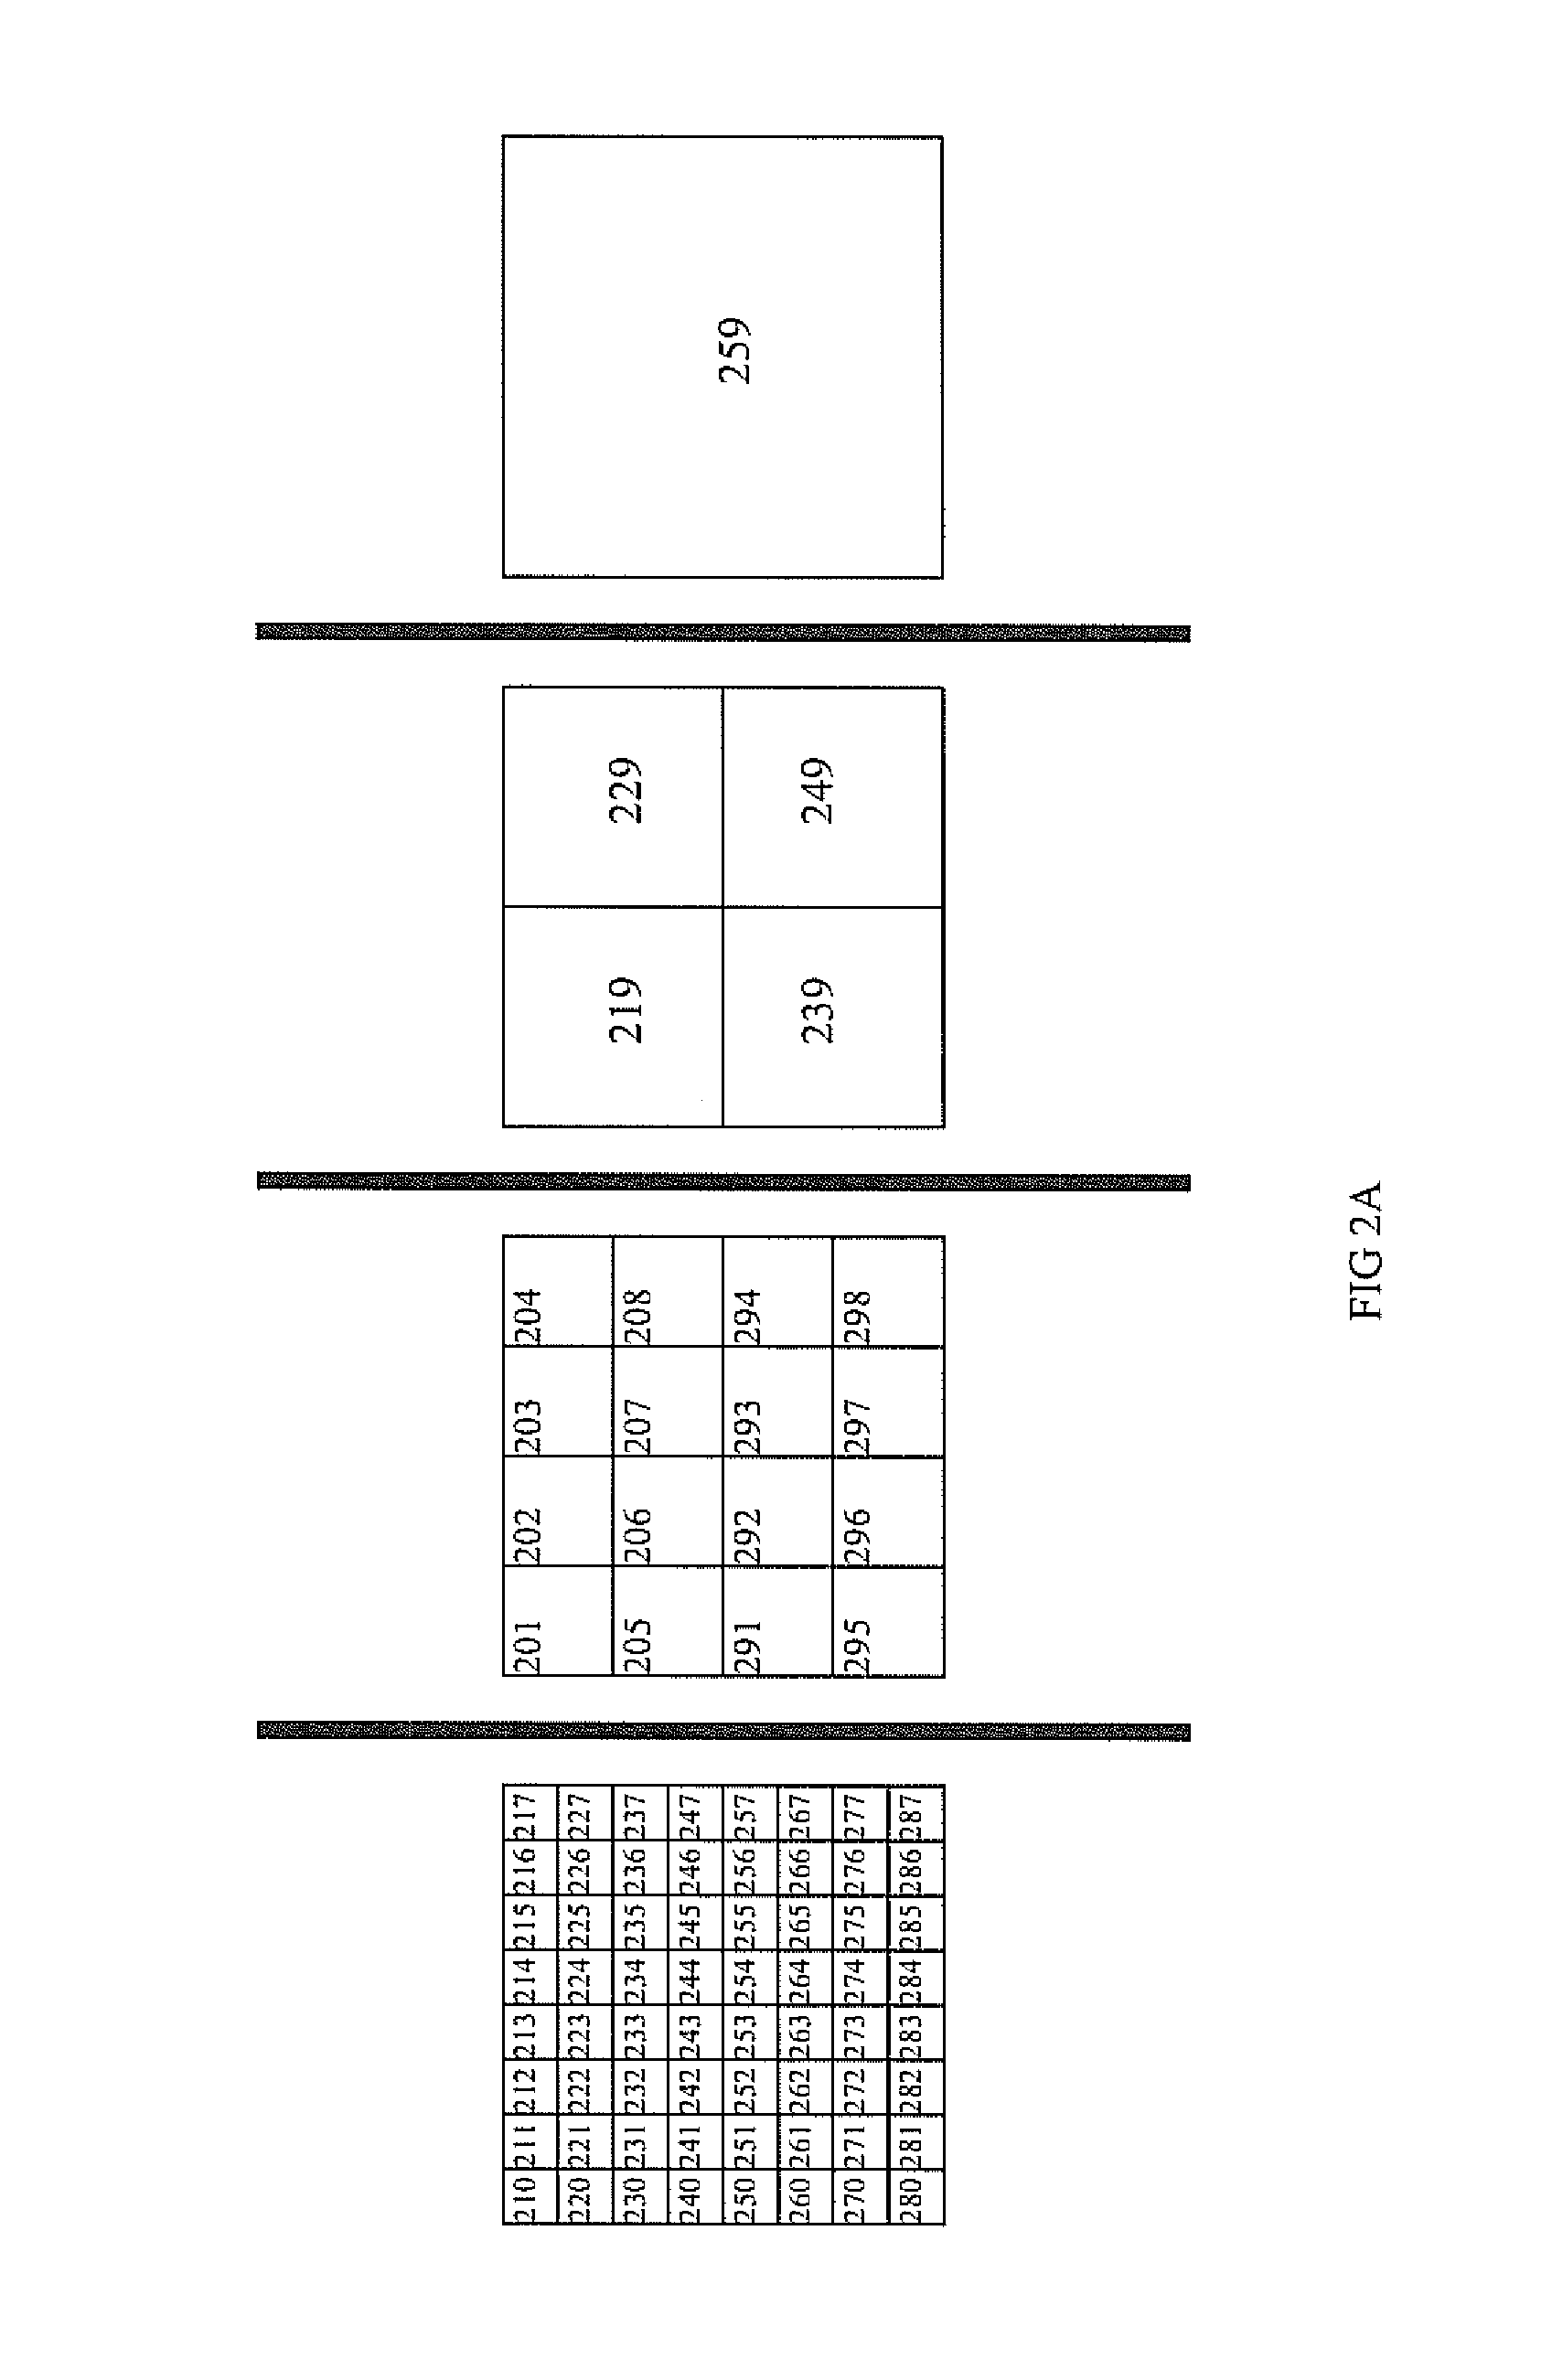 Sparse texture systems and methods